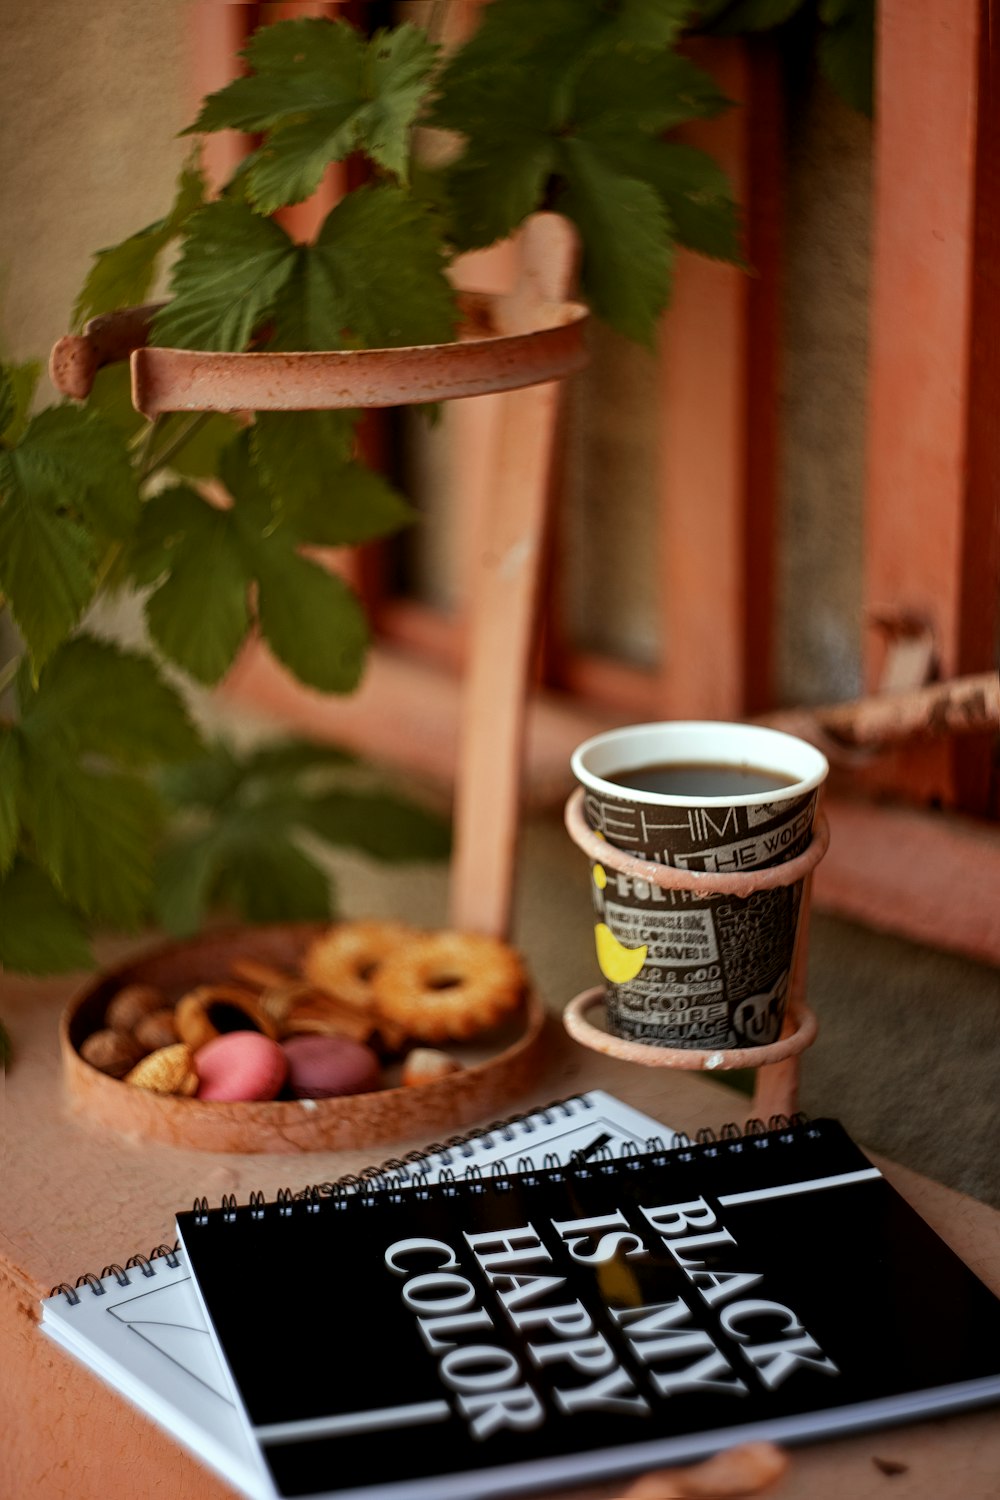 a cup of coffee next to a notebook and a cup of coffee